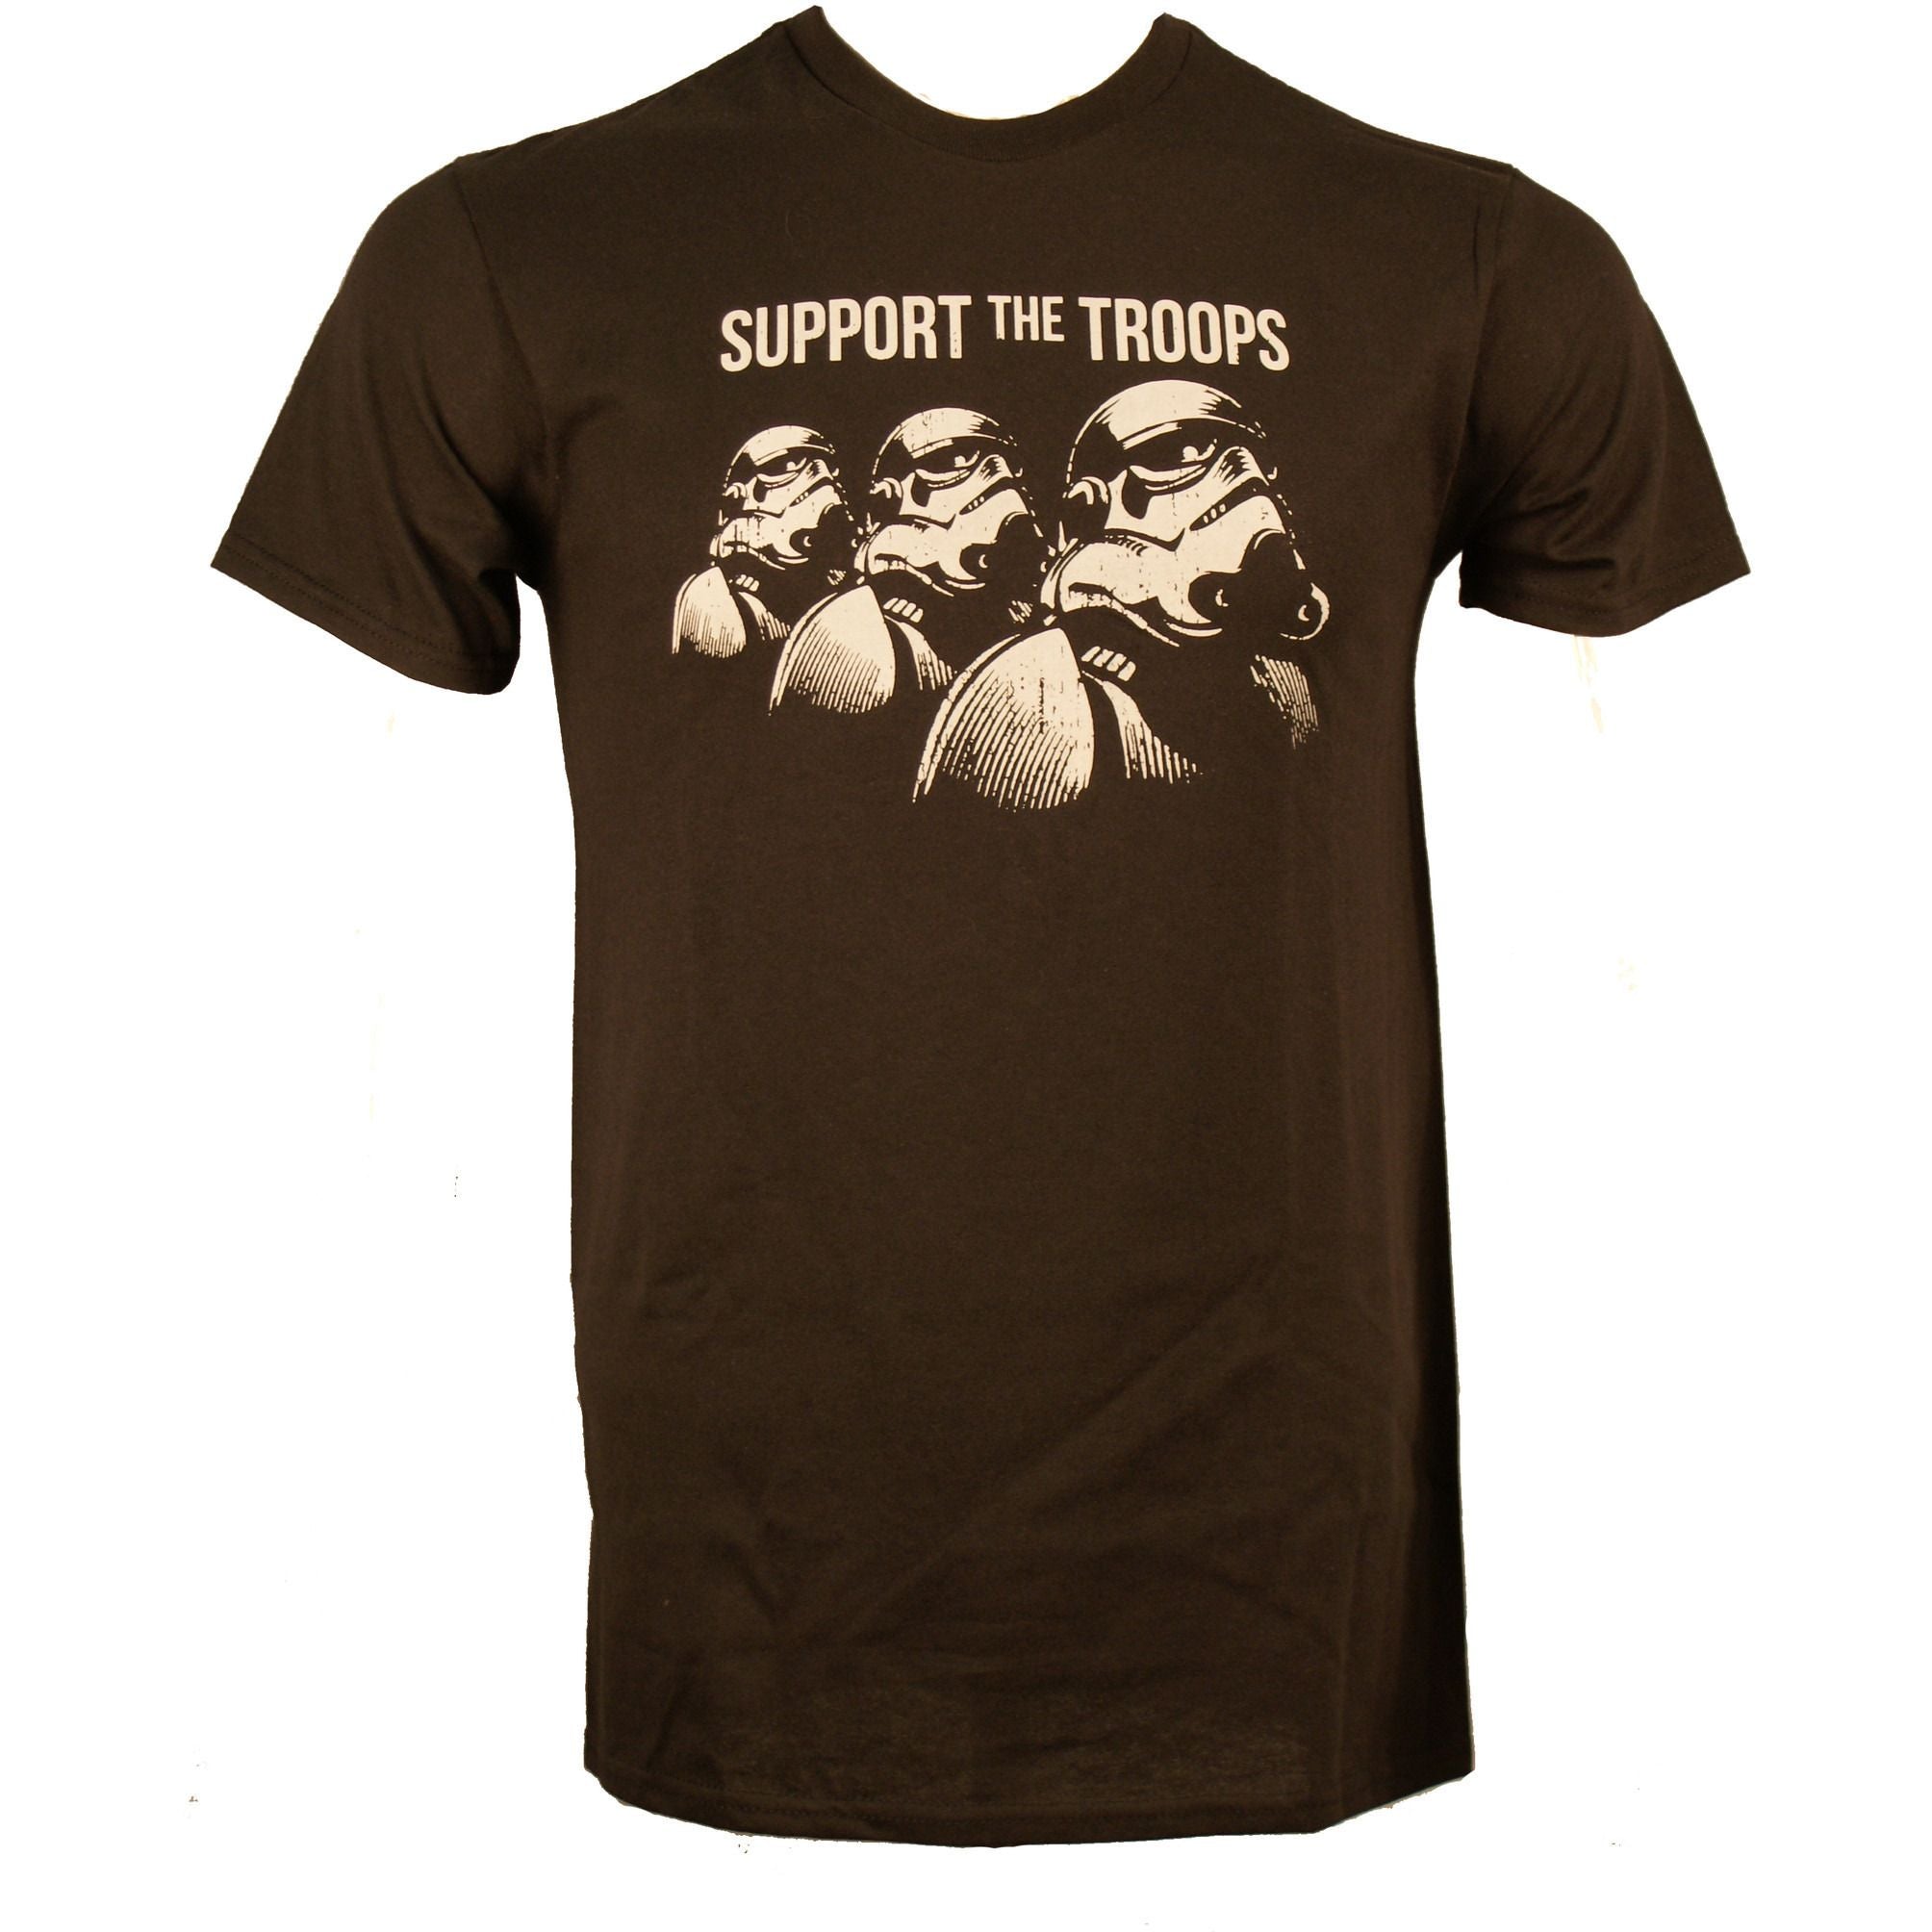  Support the Troops Men's Shirt Uncanny!